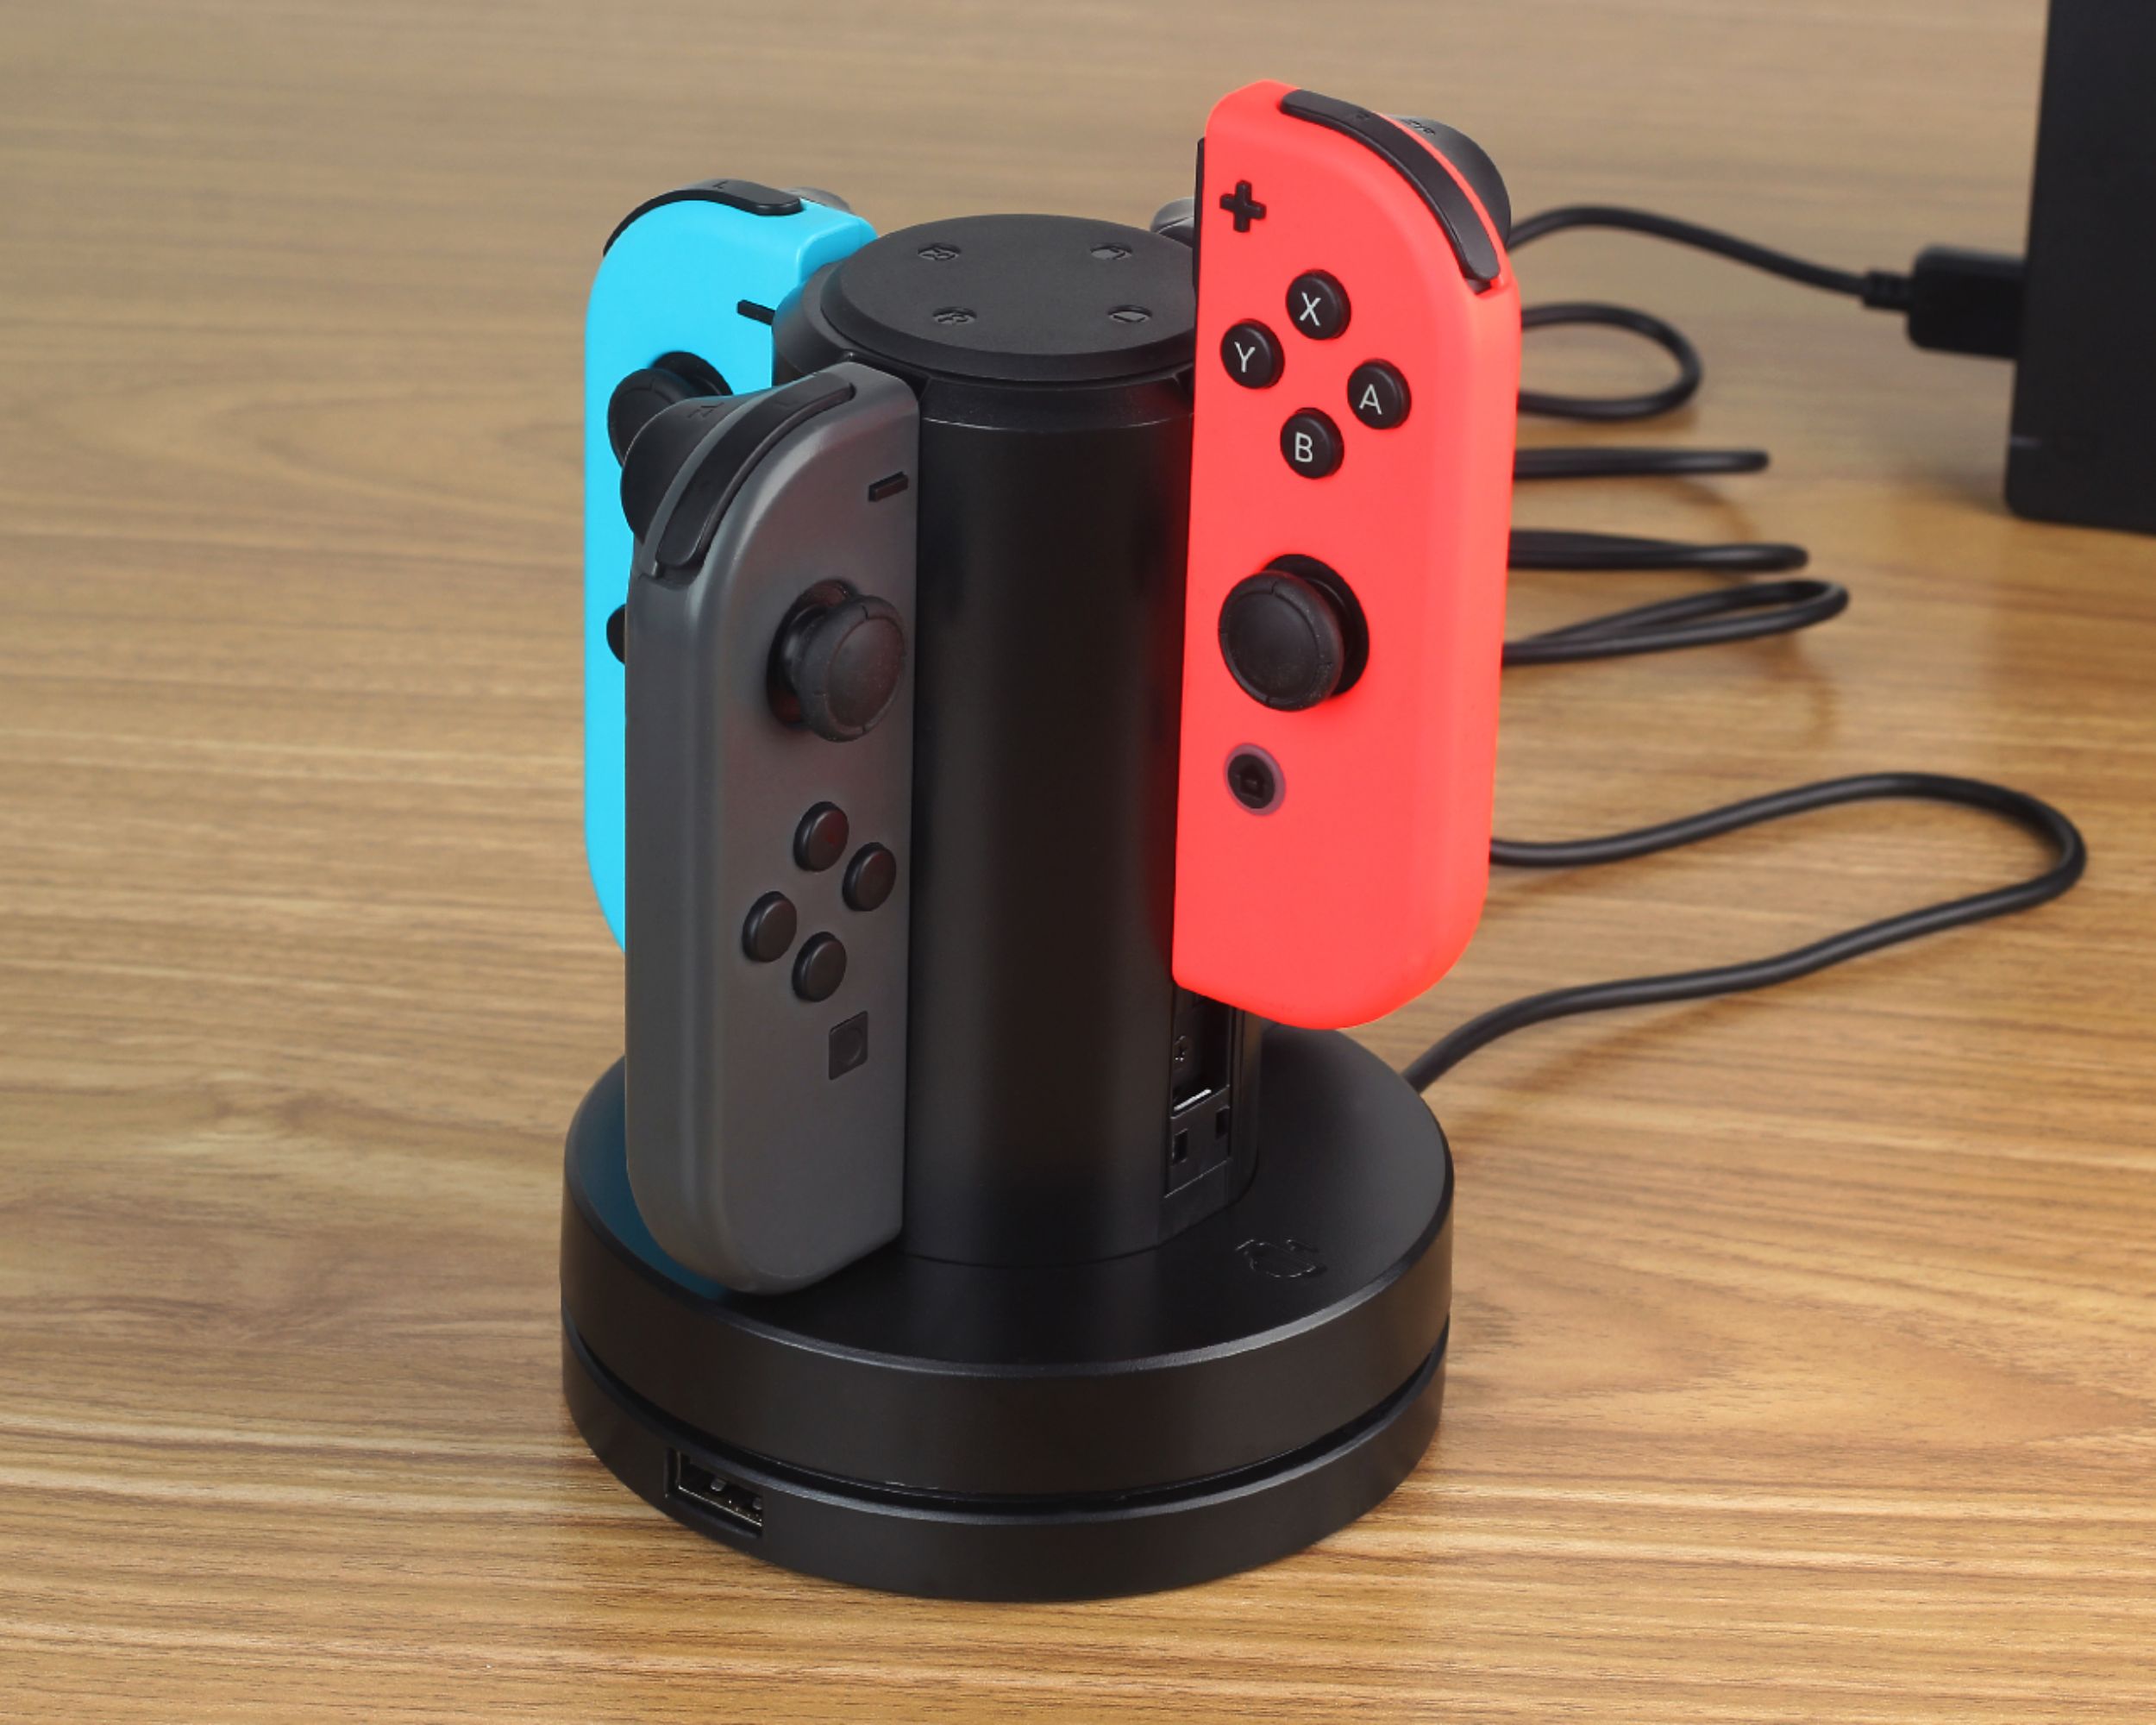 Ultimate Charge Station for Nintendo Switch & OLED